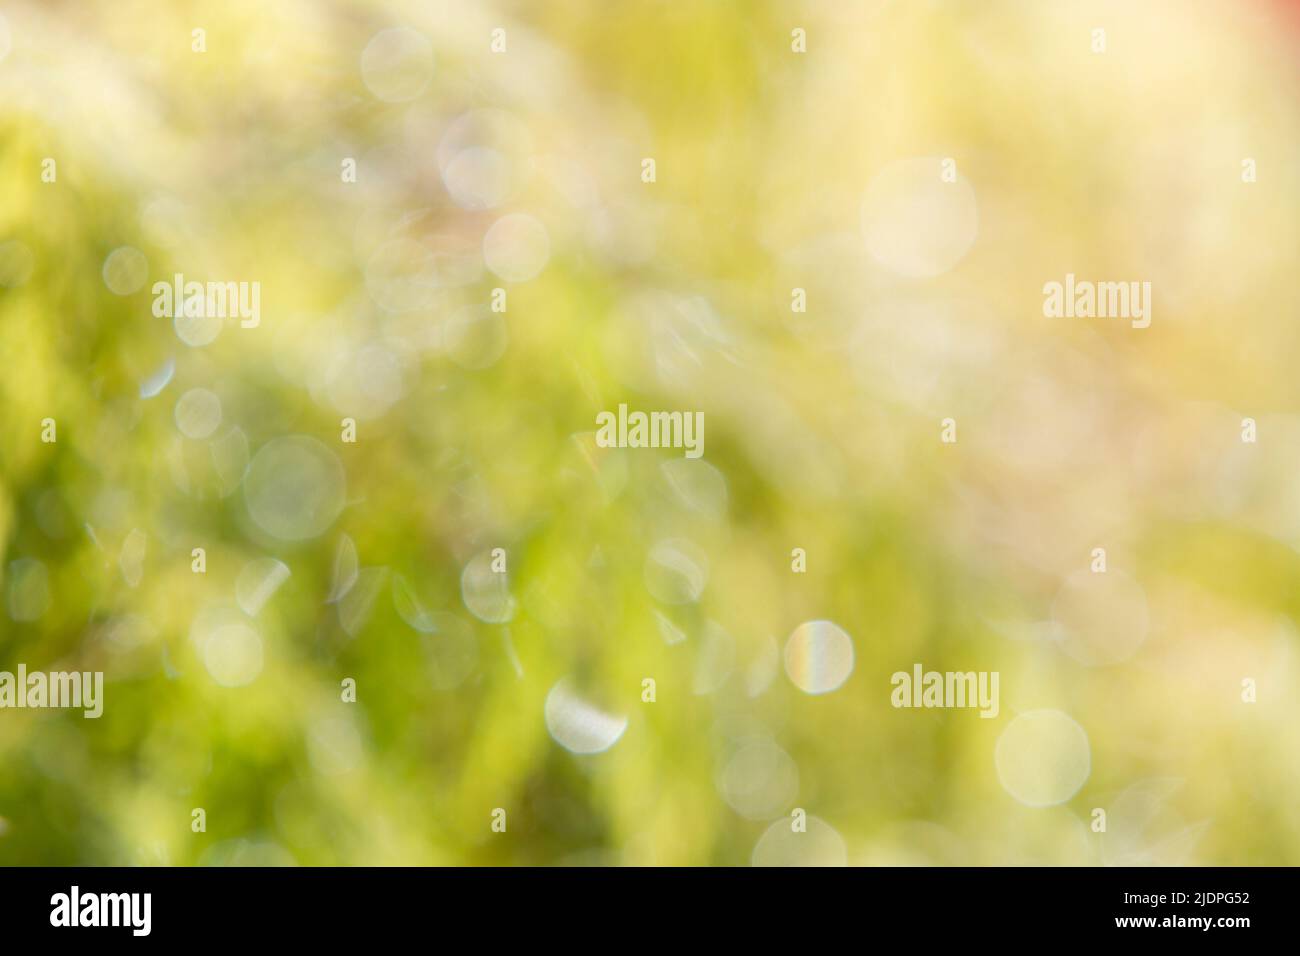 Colorful spring bokeh abstract in shades of green and yellow. Stock Photo